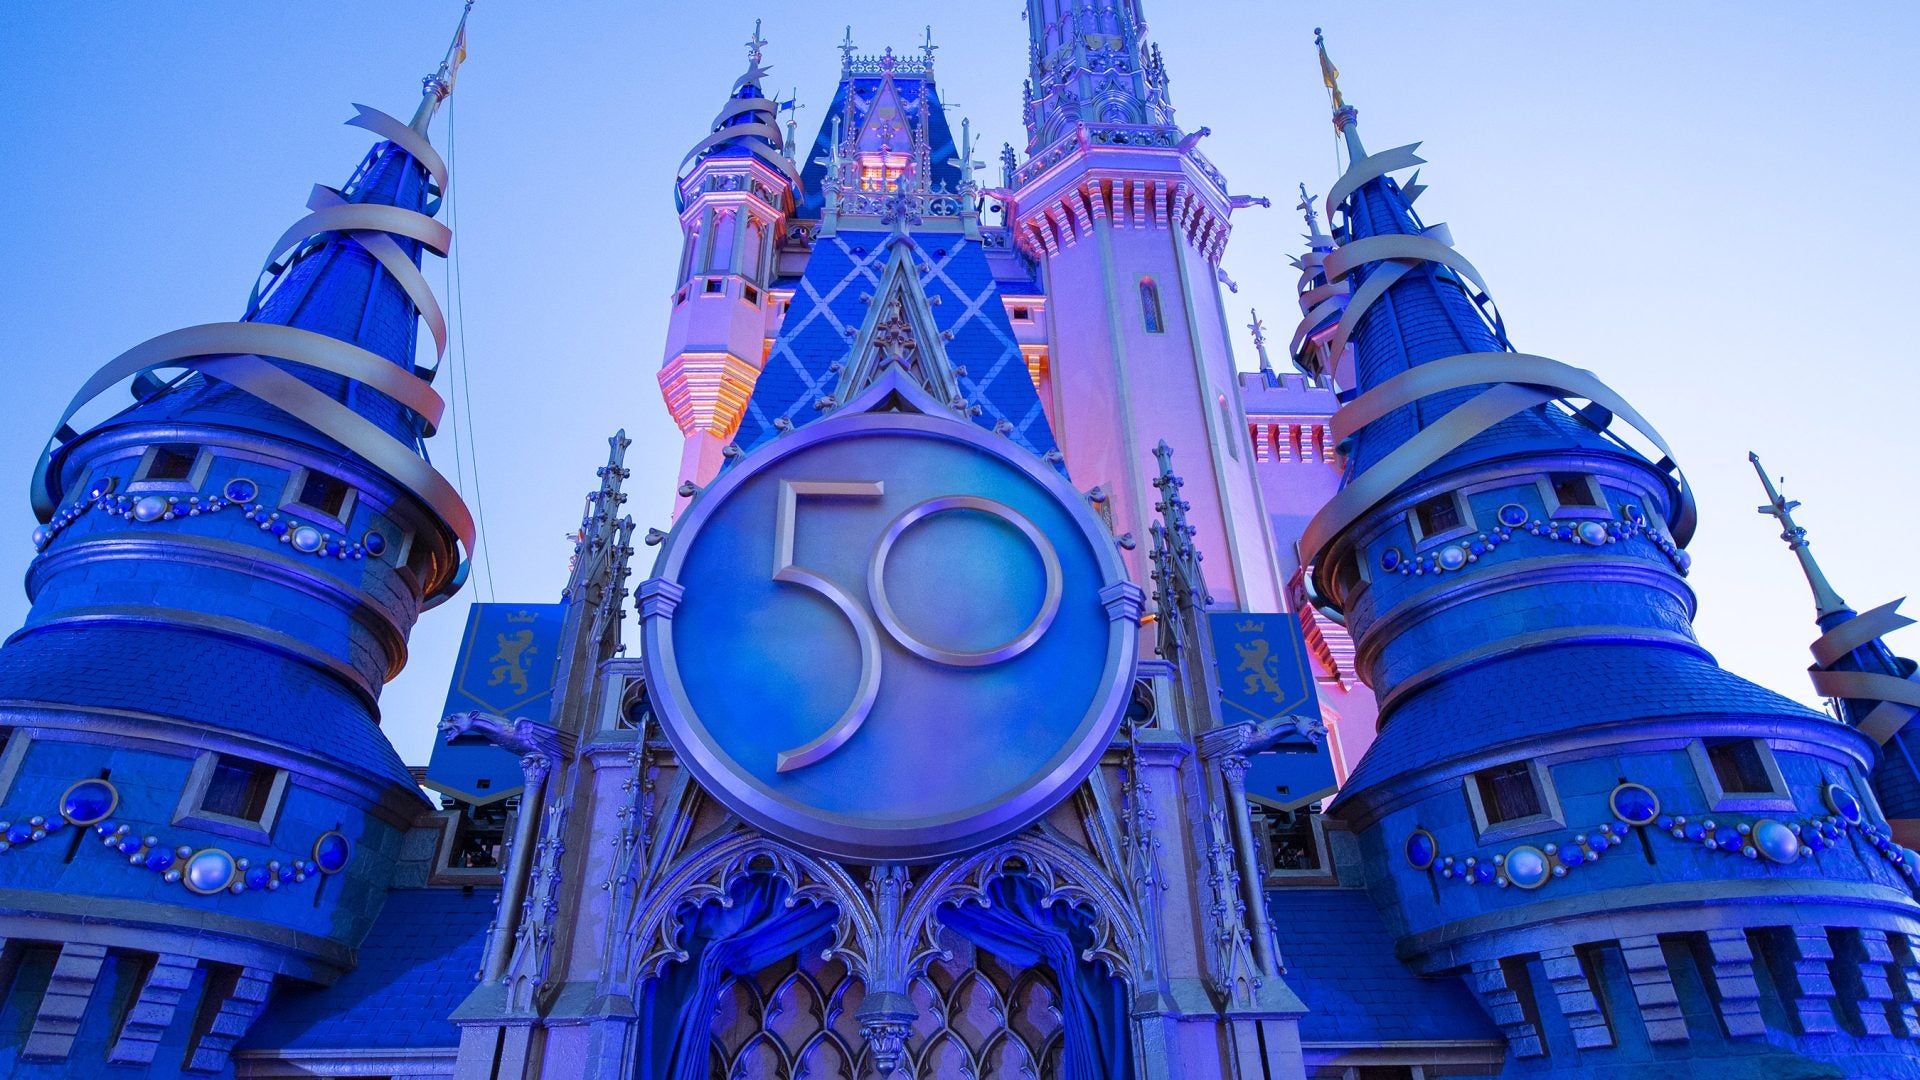 All Of The Fun New Ways To Enjoy A Family Visit To Disney World's 50th Anniversary Celebration